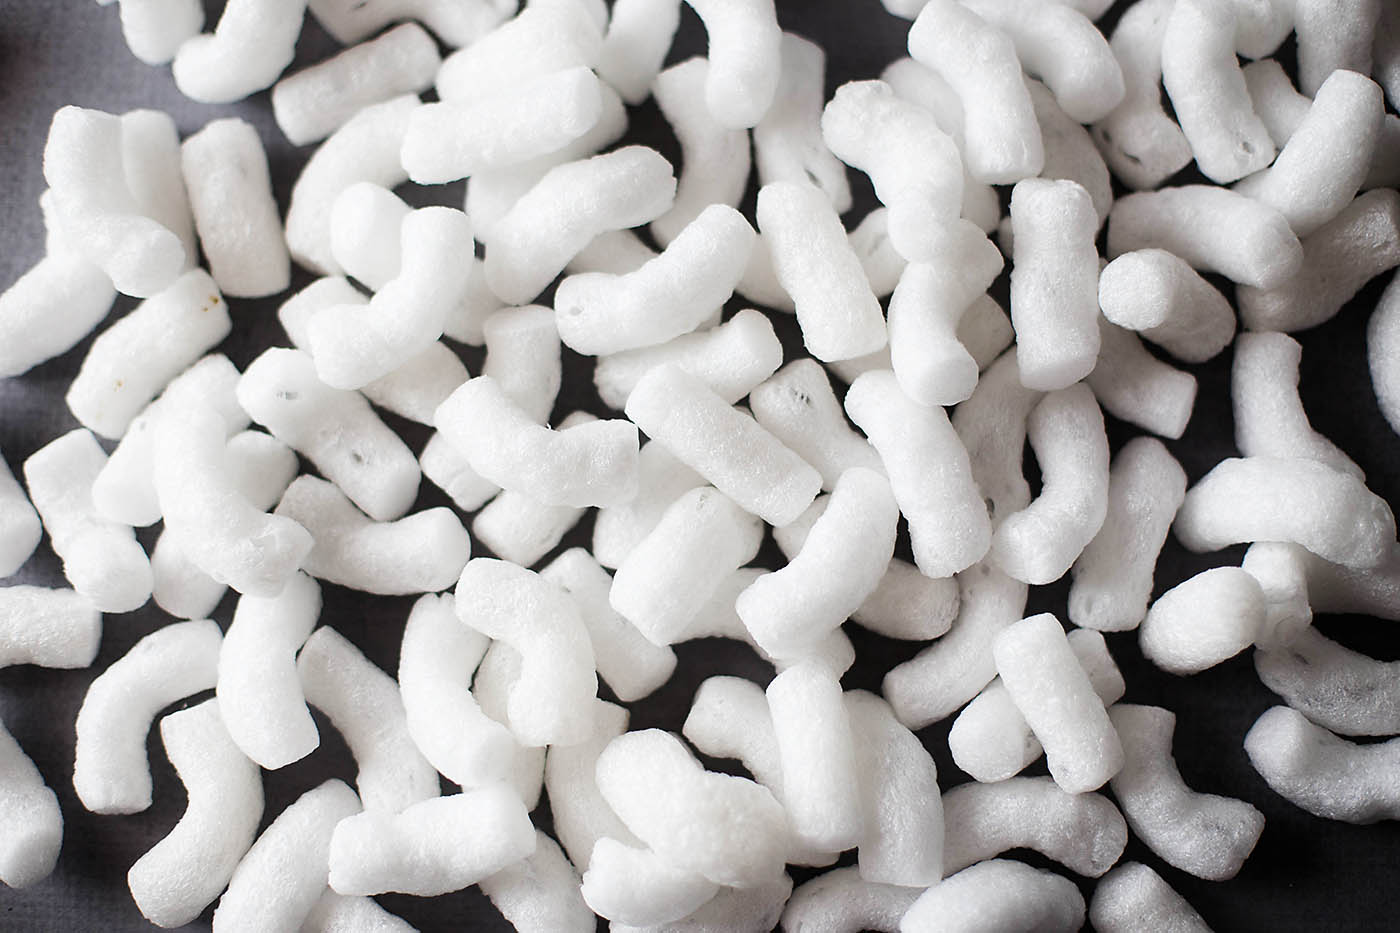 Building with biodegradable packing peanuts - great idea!